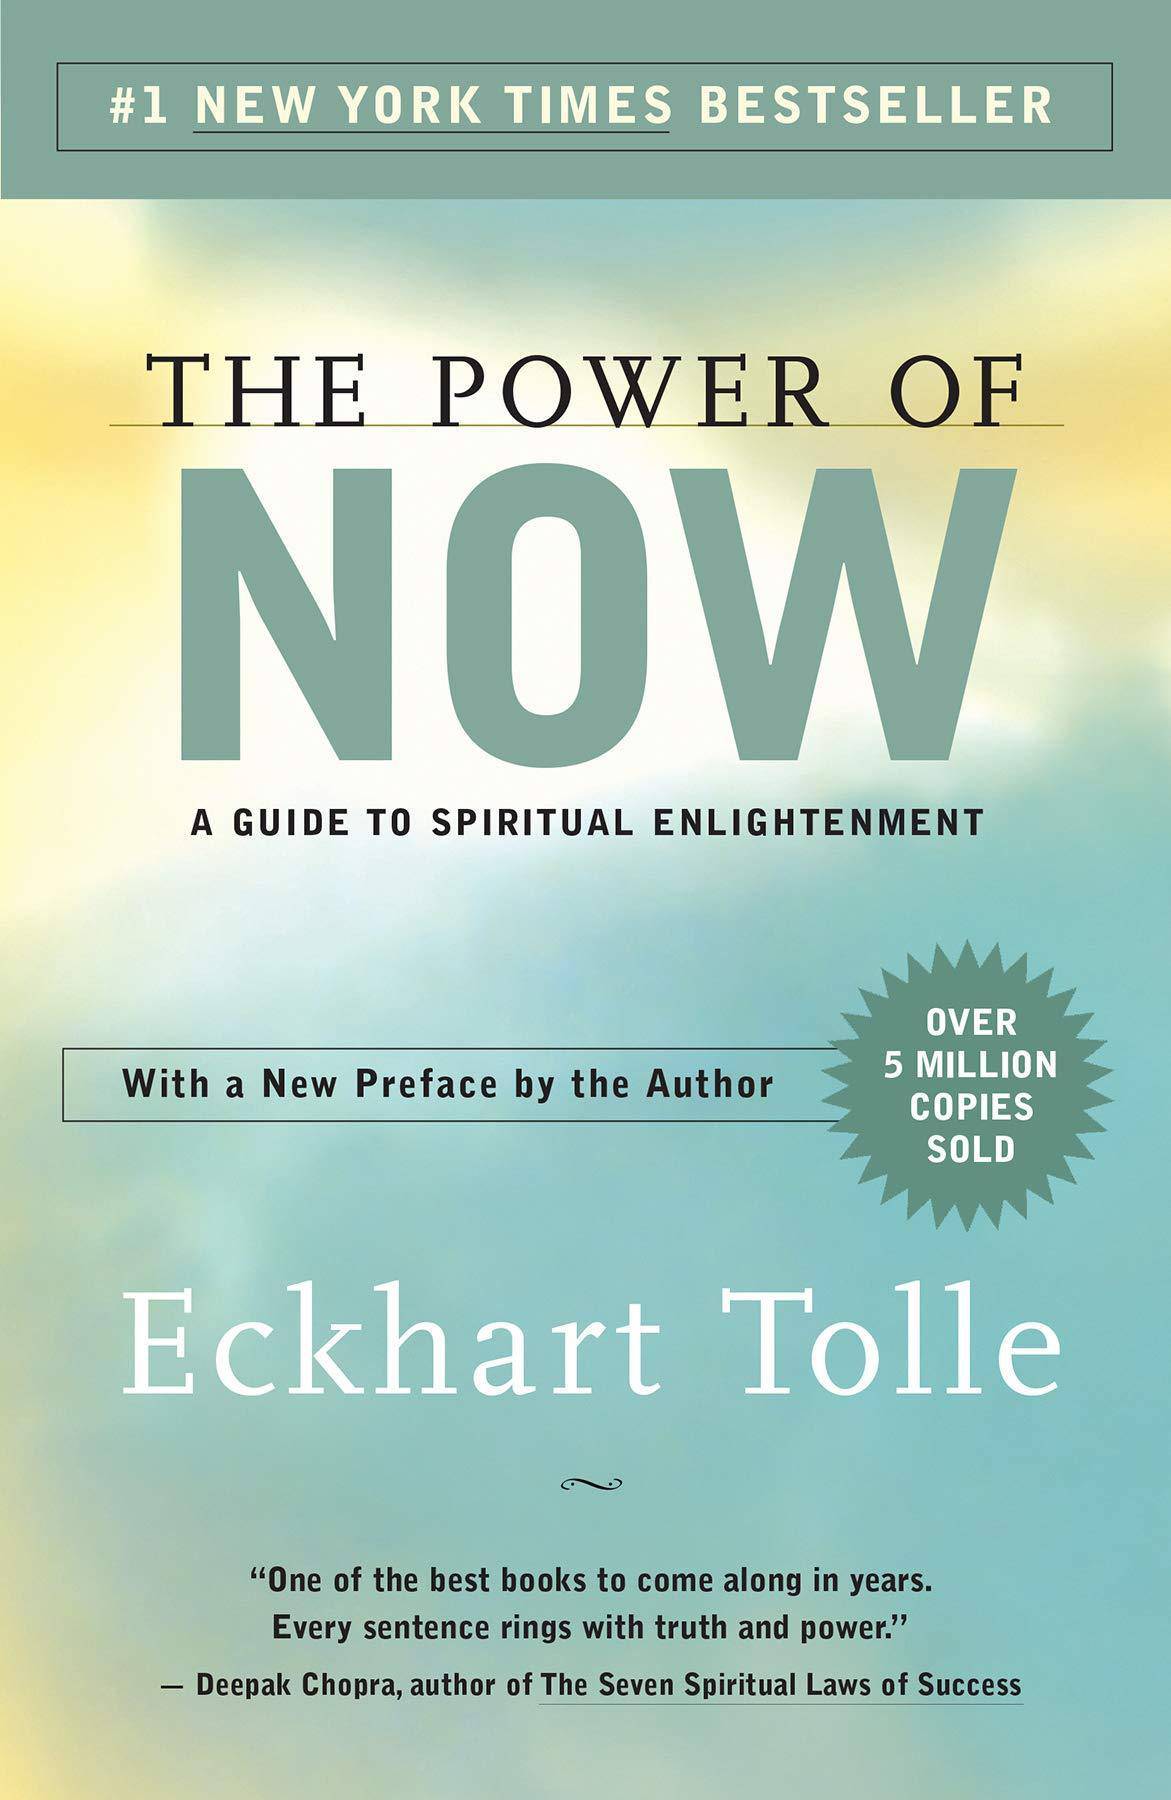 Power of Now: A Guide to Spiritual Enlightenment - SureShot Books Publishing LLC